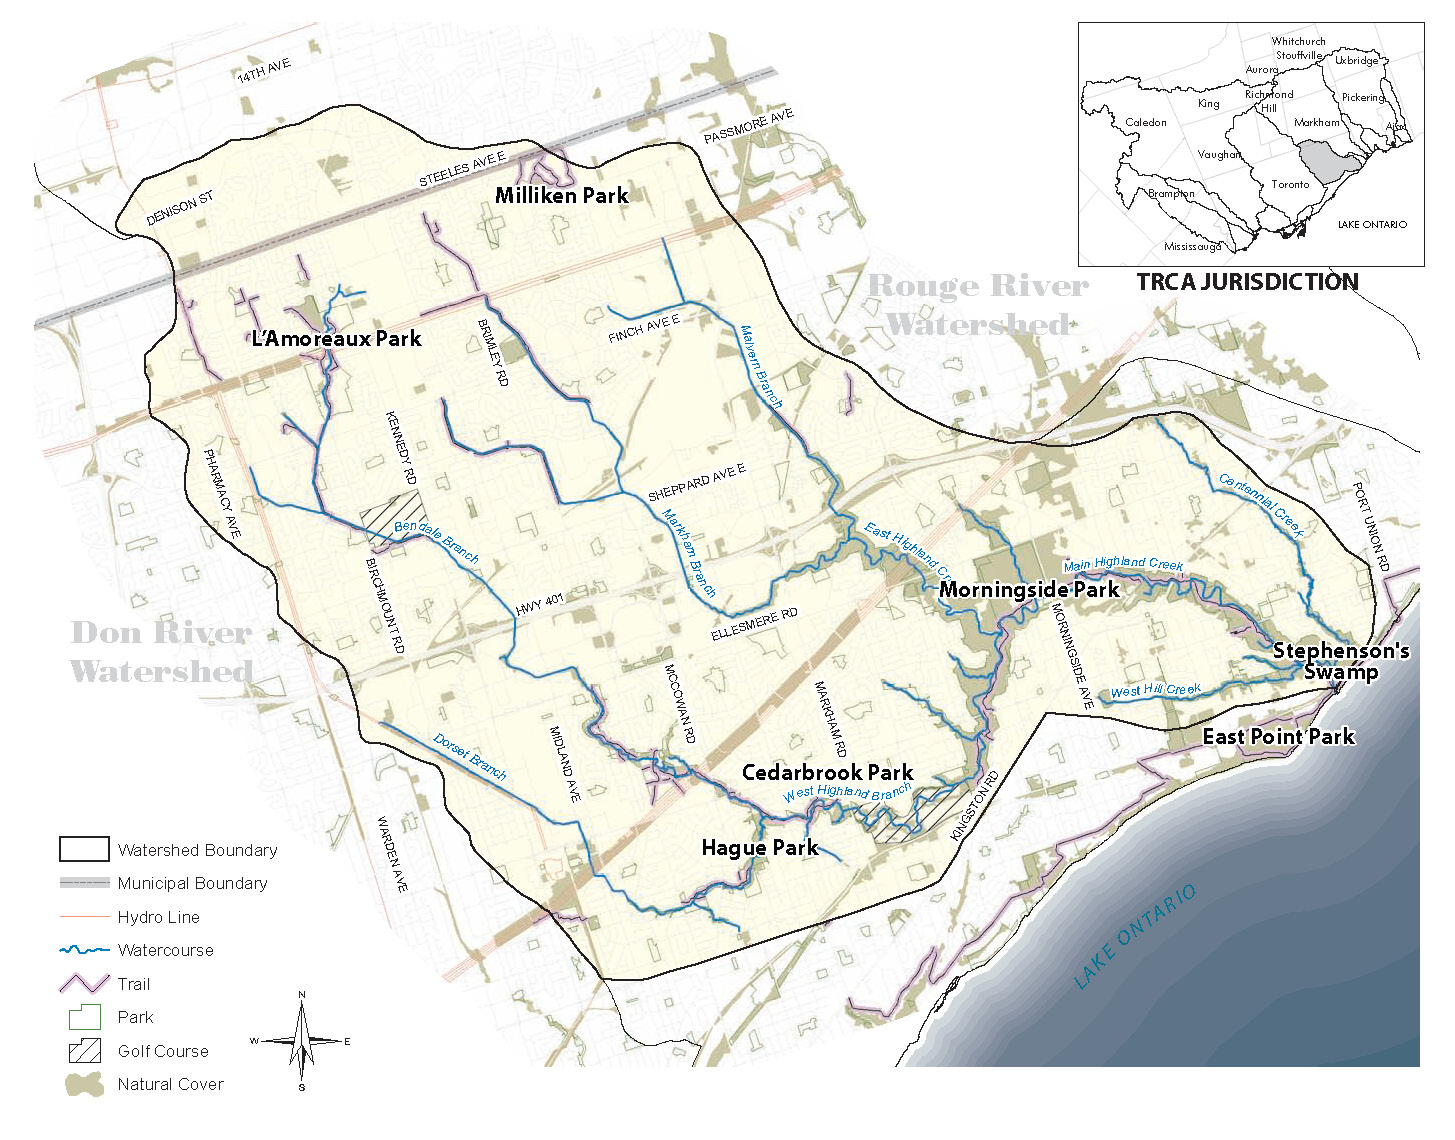 Places of interest within the Highland Creek Watershed